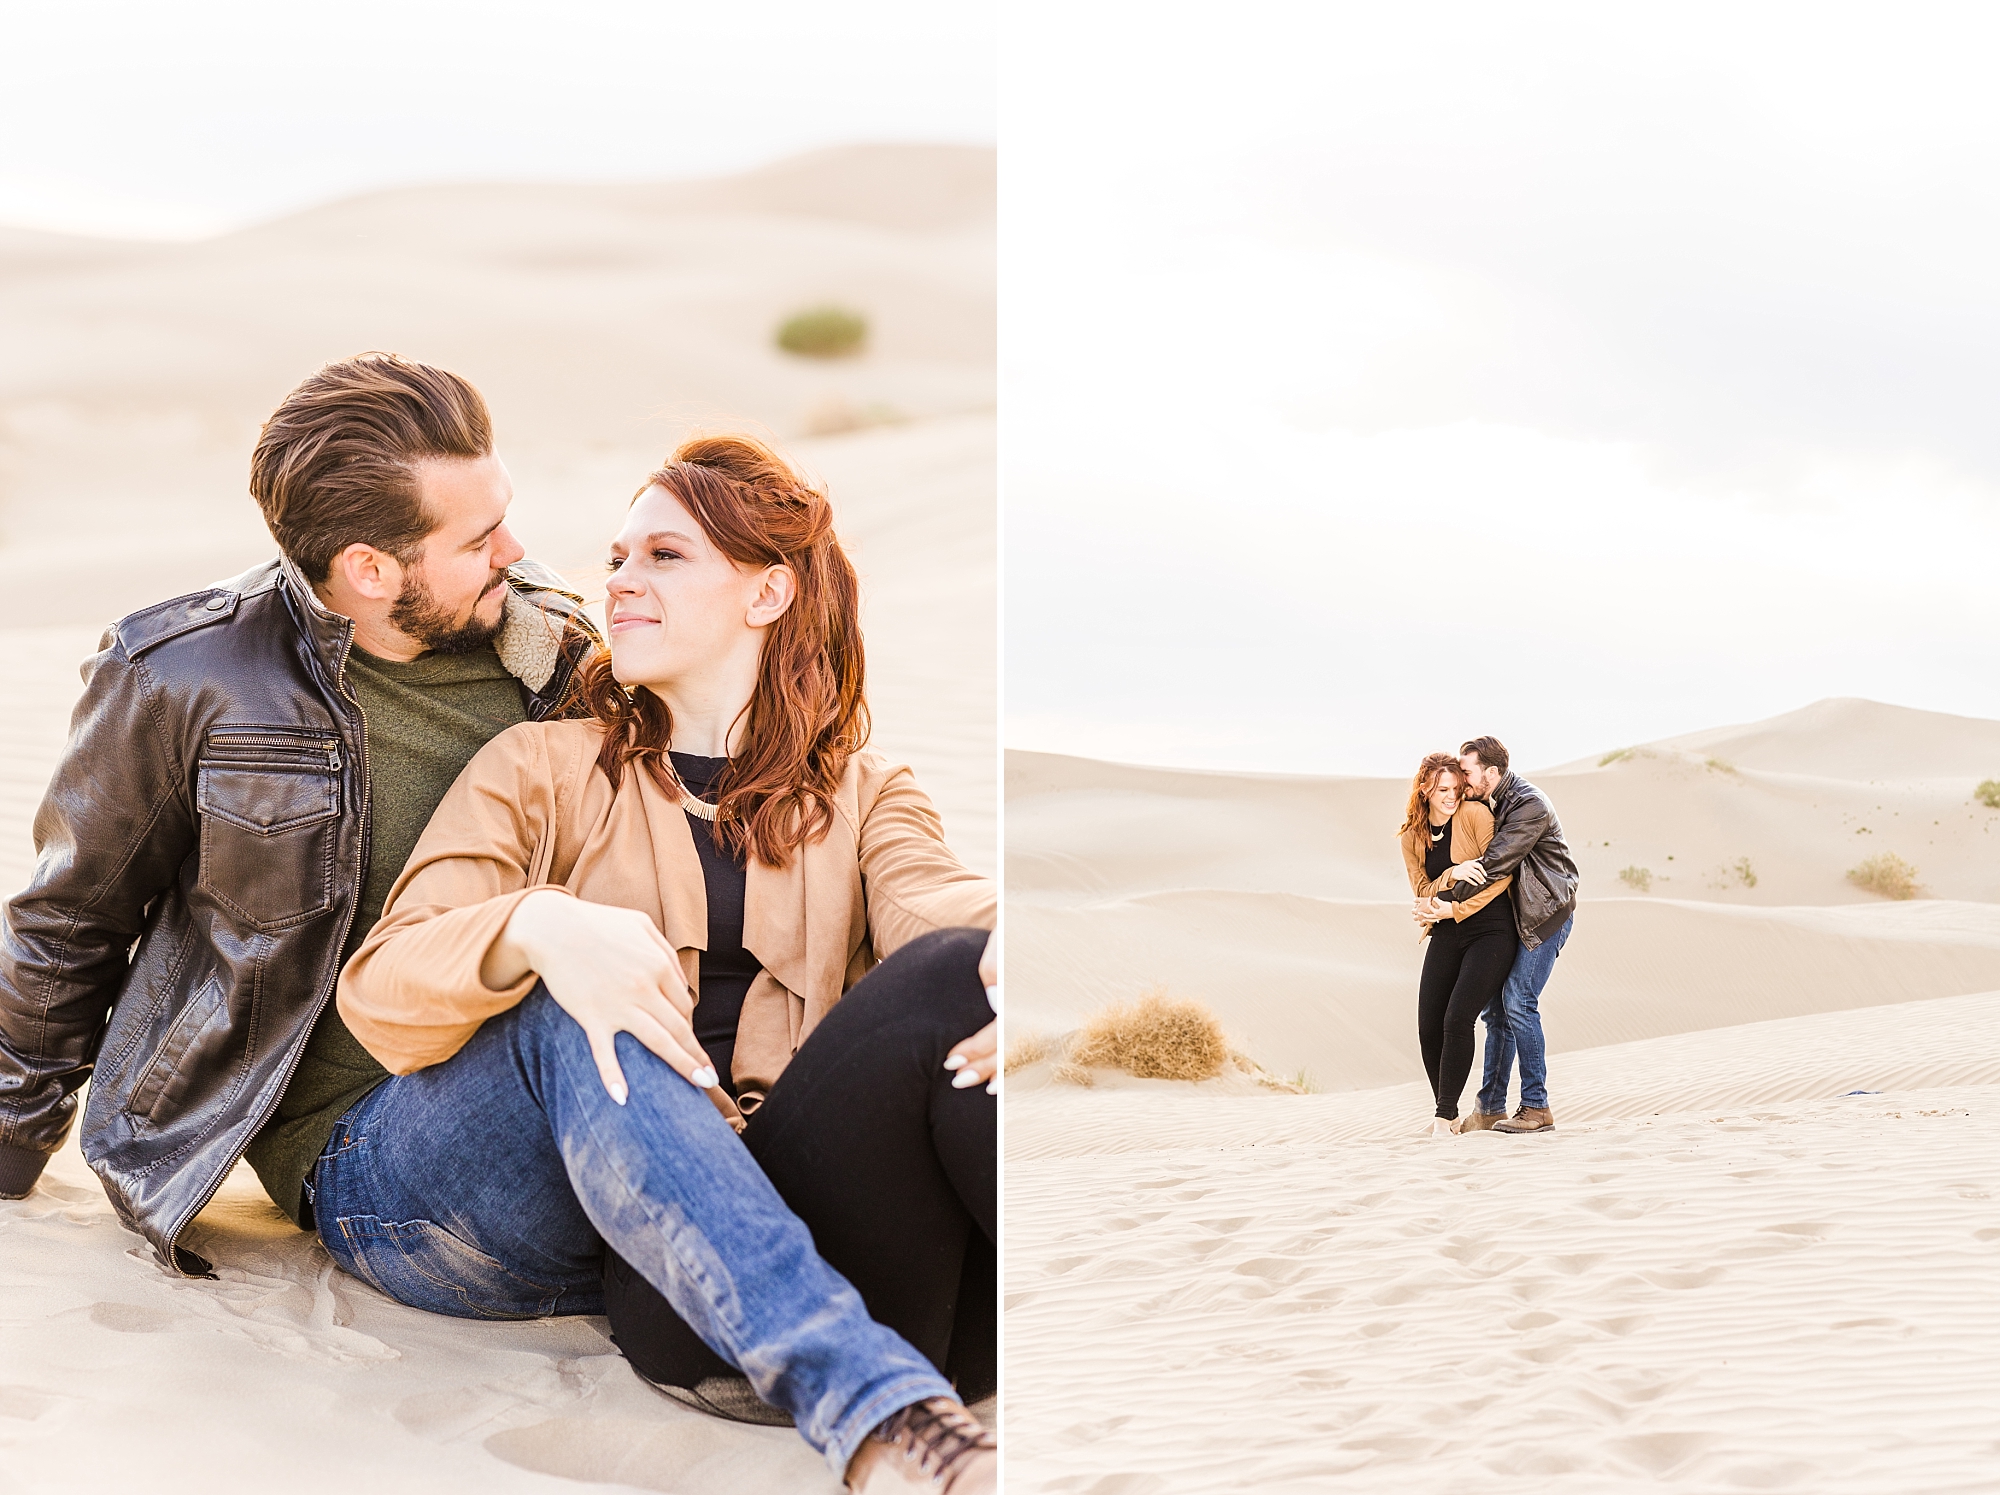 Adventuring and playing in the soft sand of the Utah Little Sahara desert for their engagement session